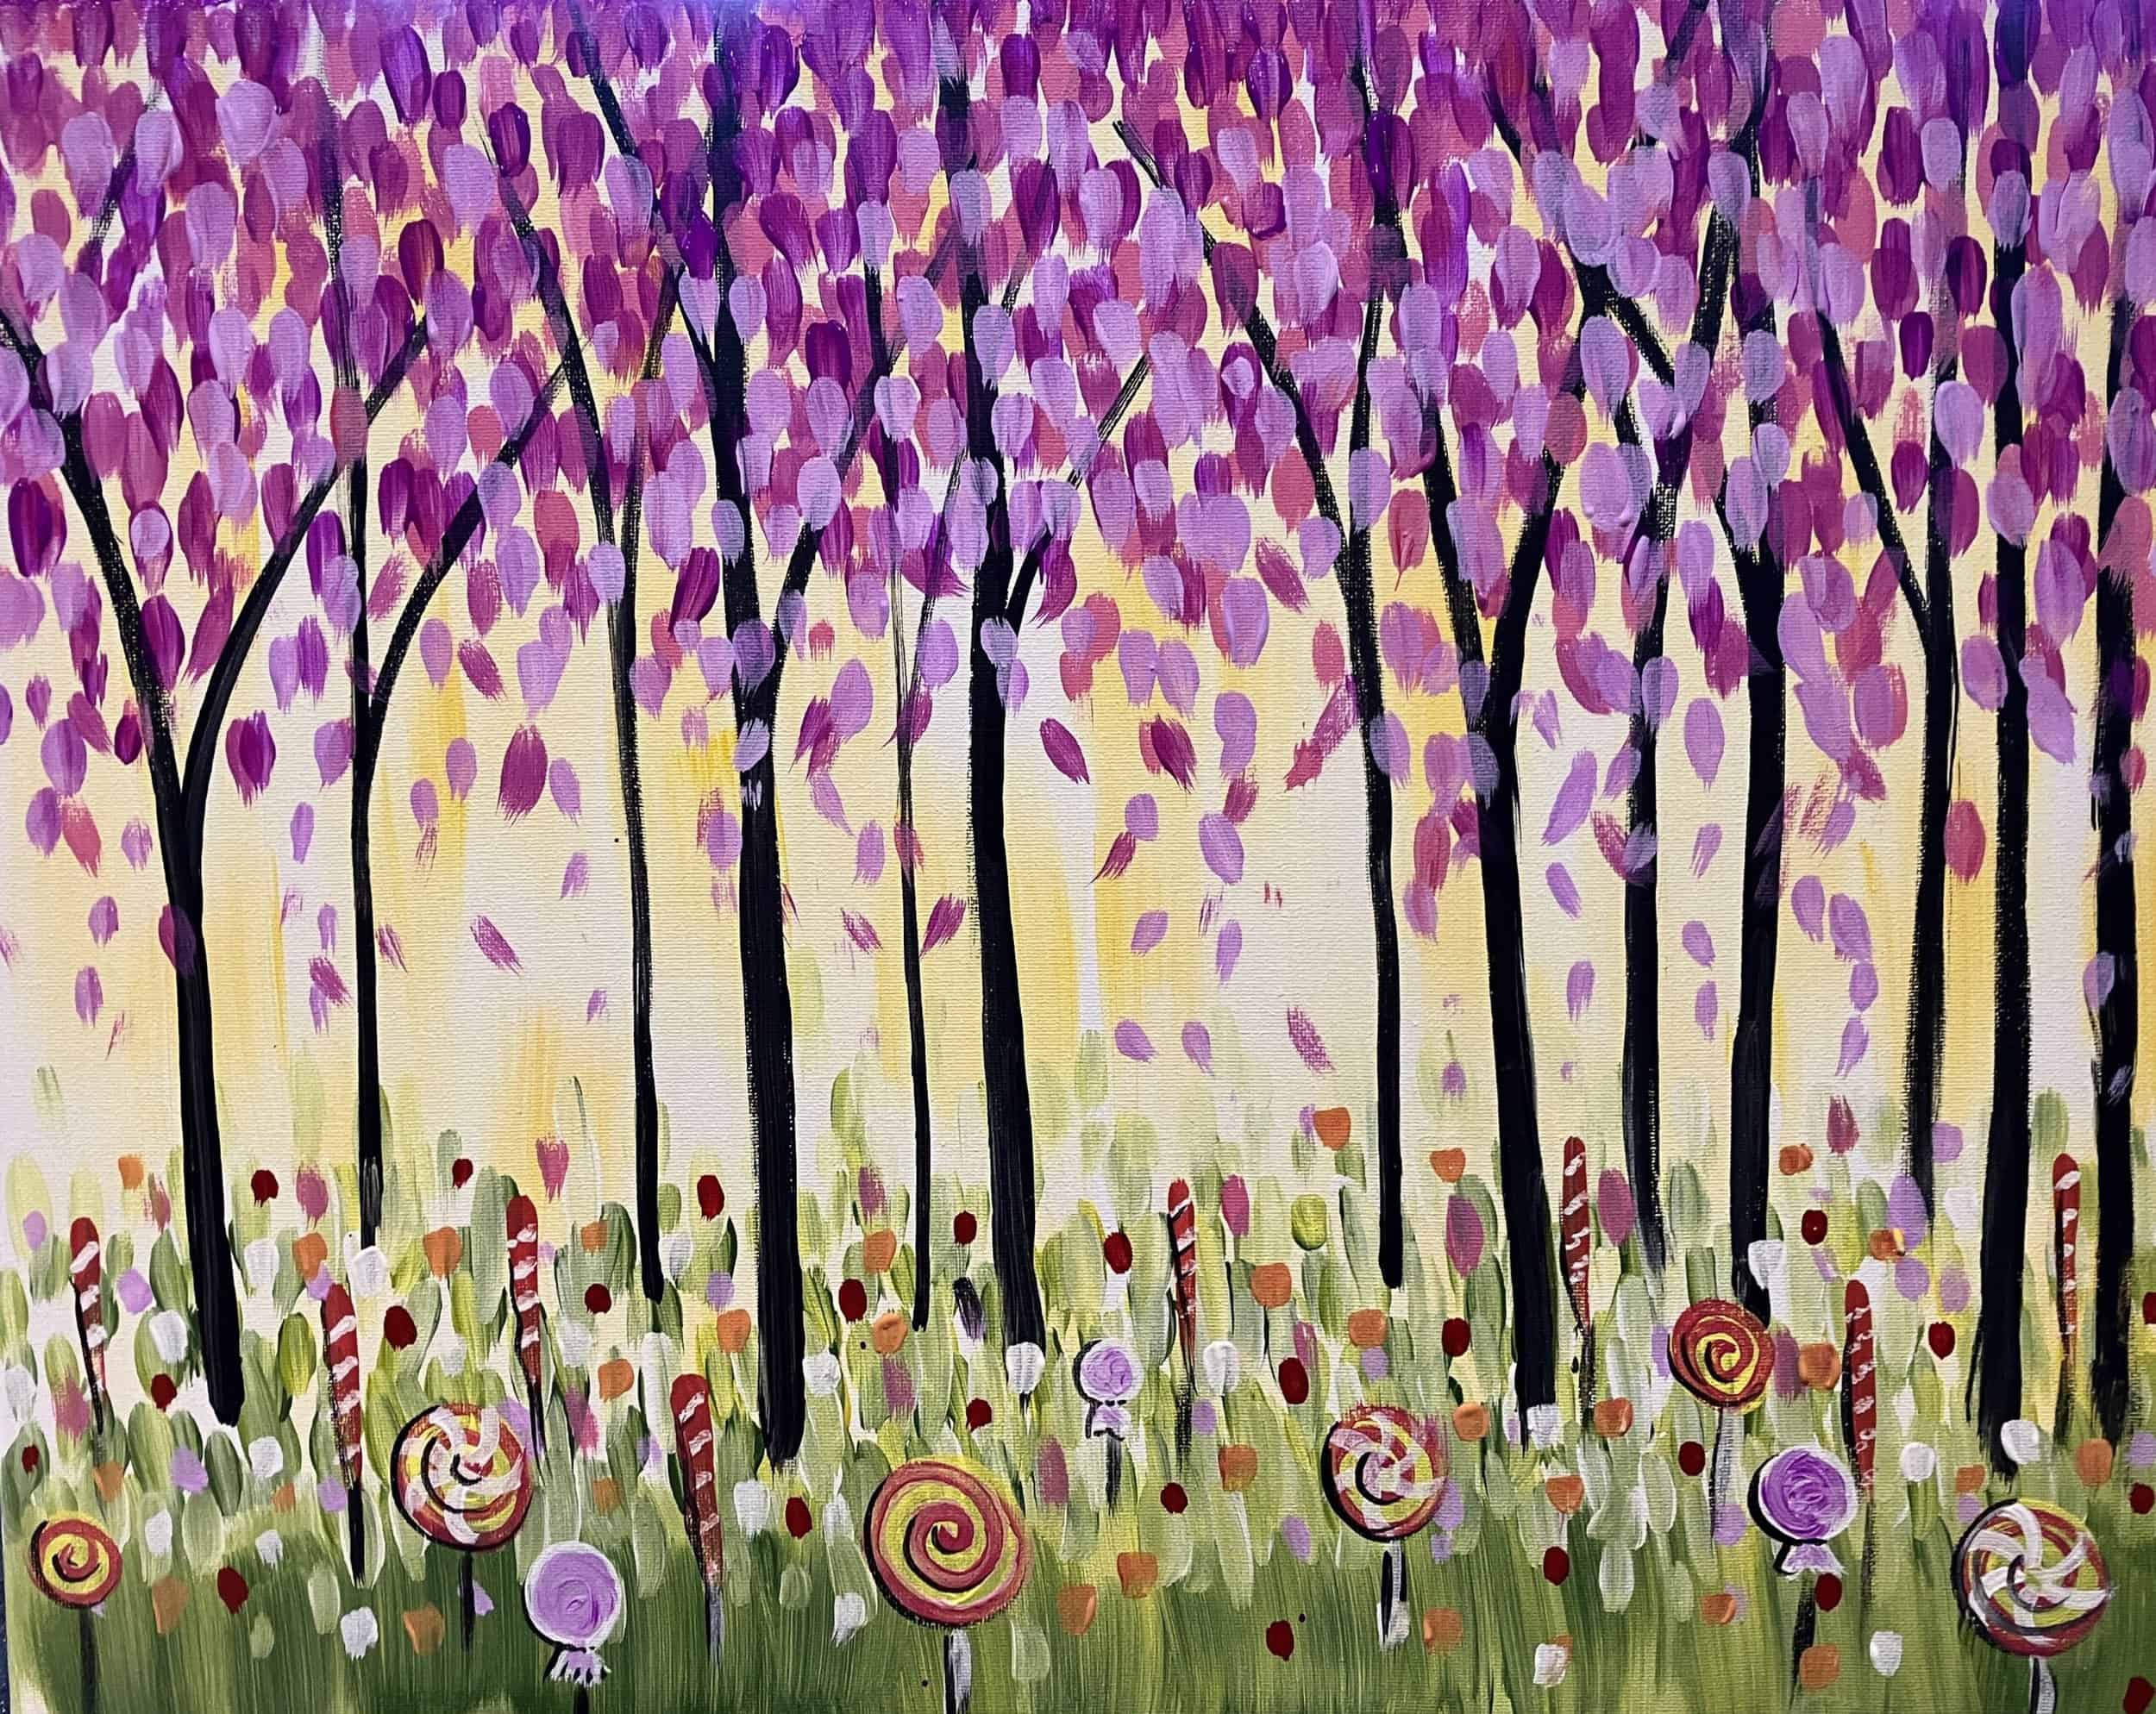 A fun painting experience featuring purple trees and lollipops.